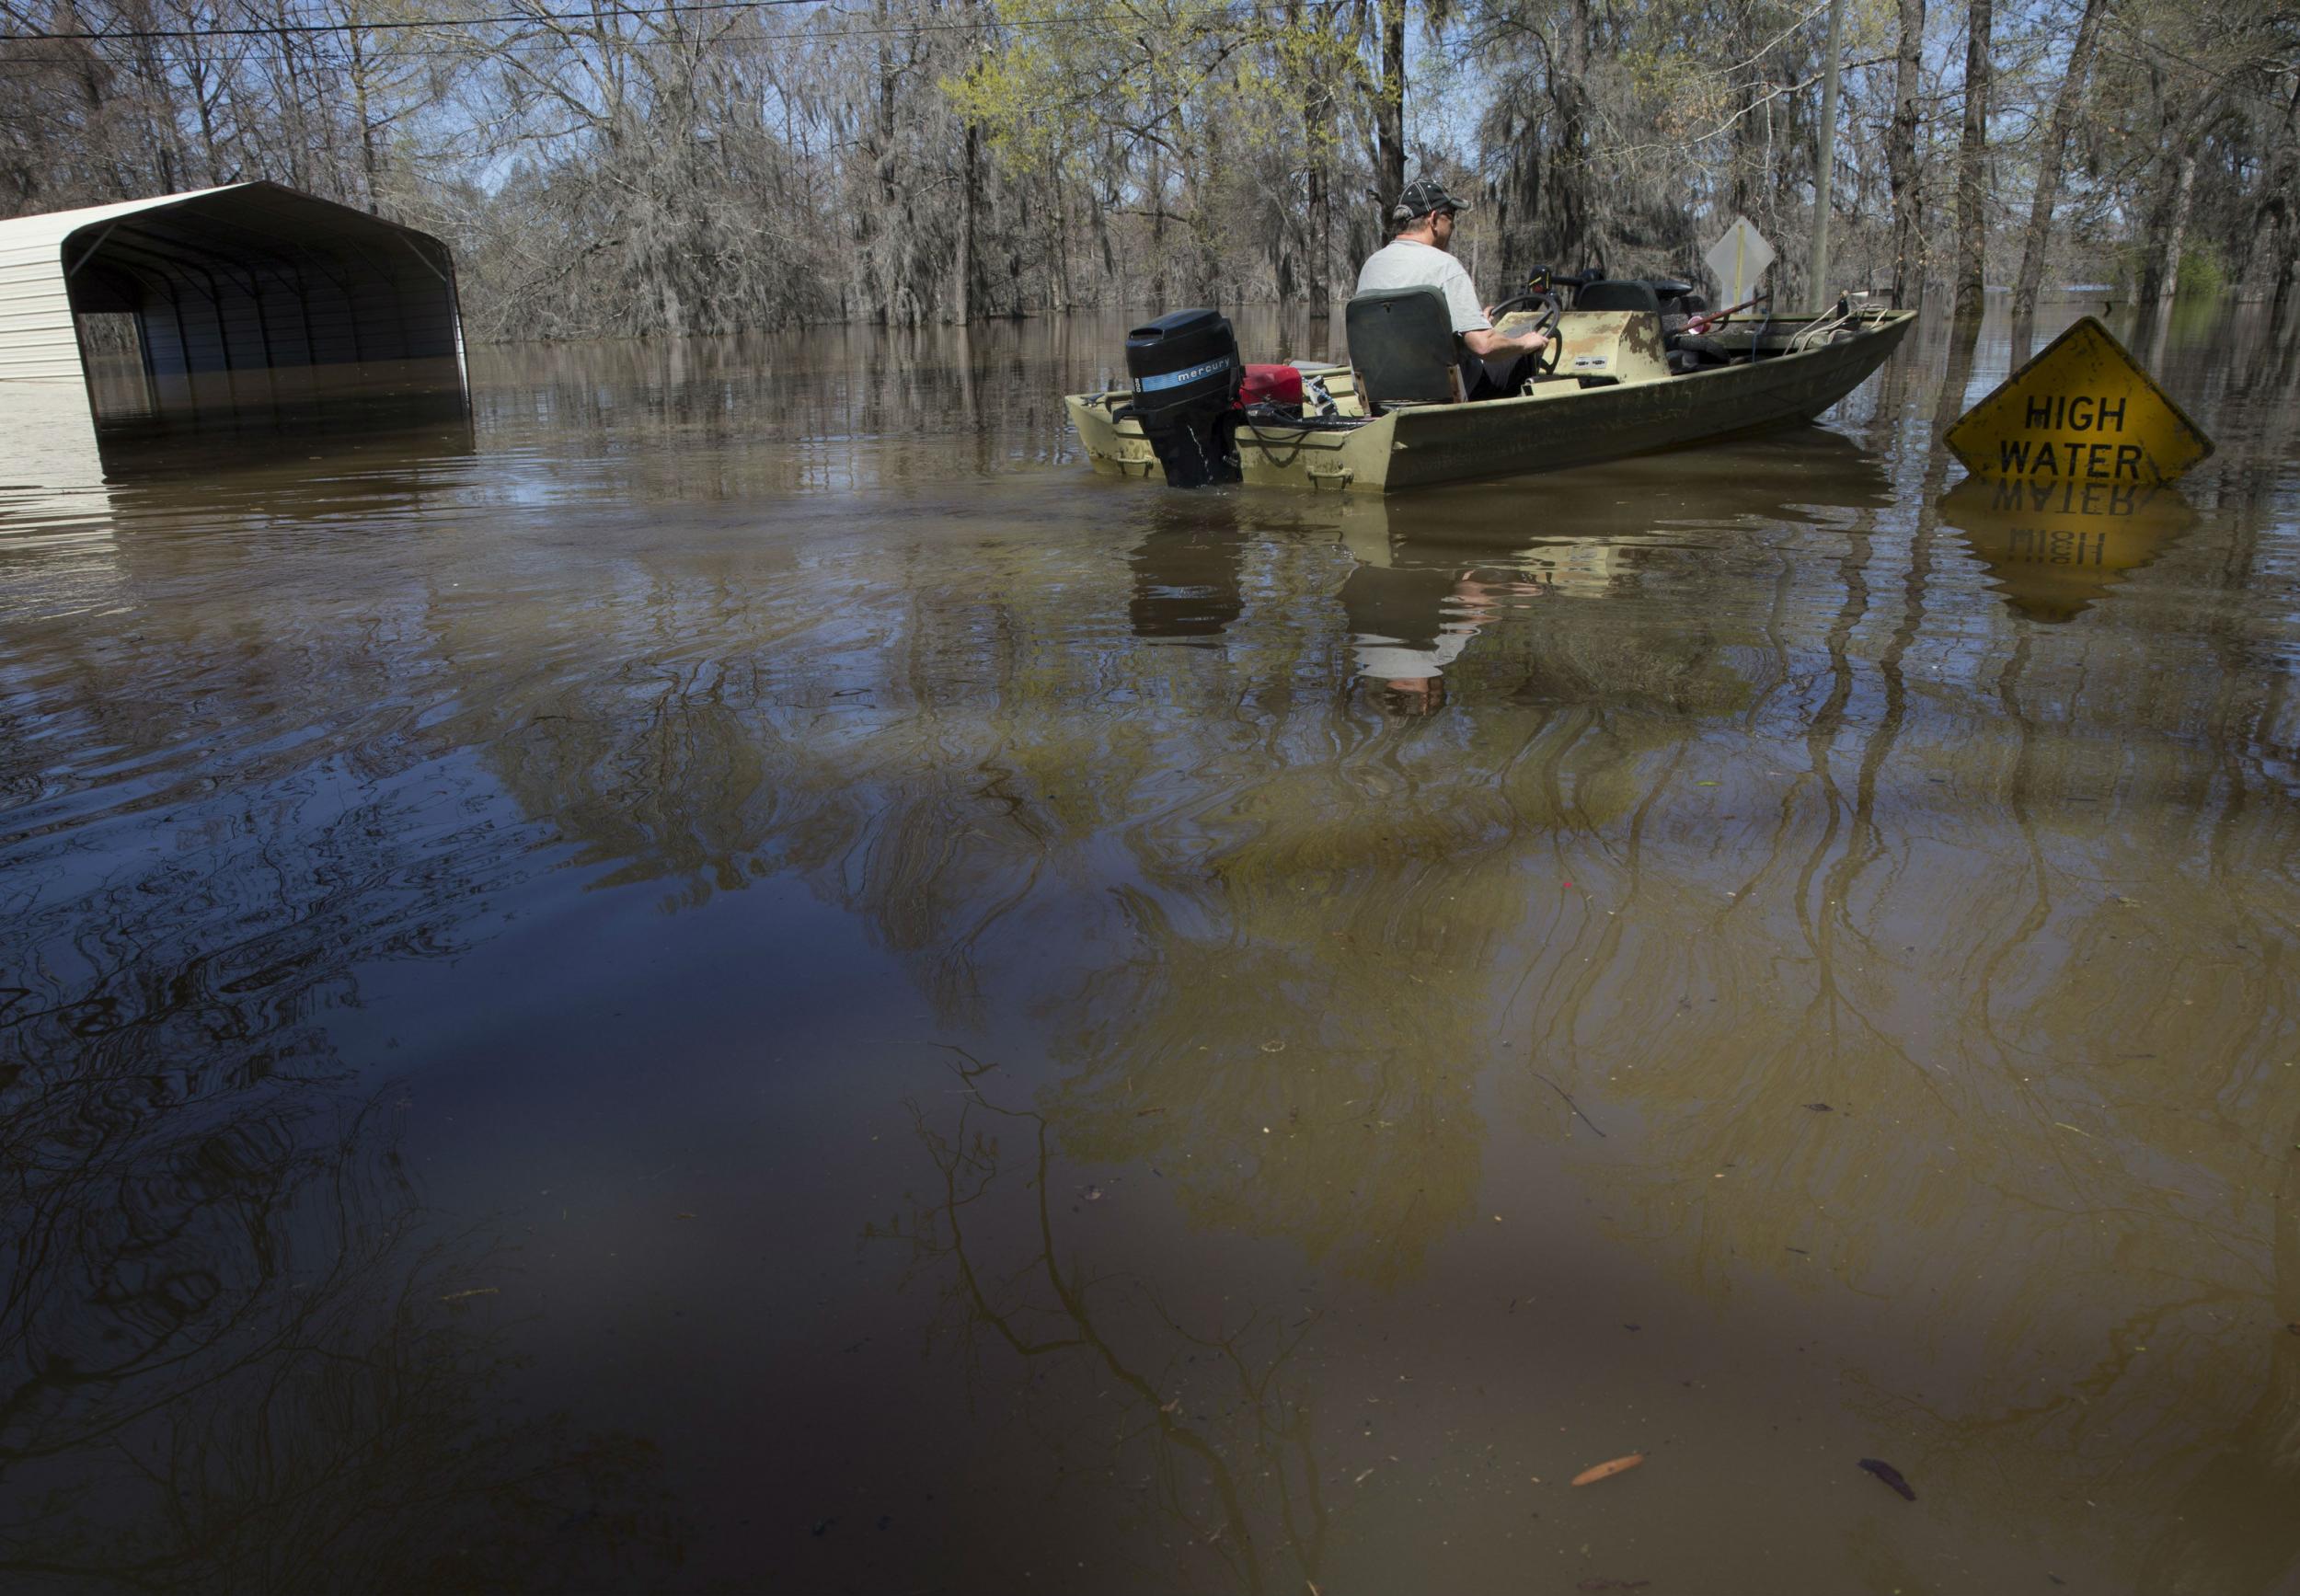 The federal government has declared a state of disaster in parts of Louisiana